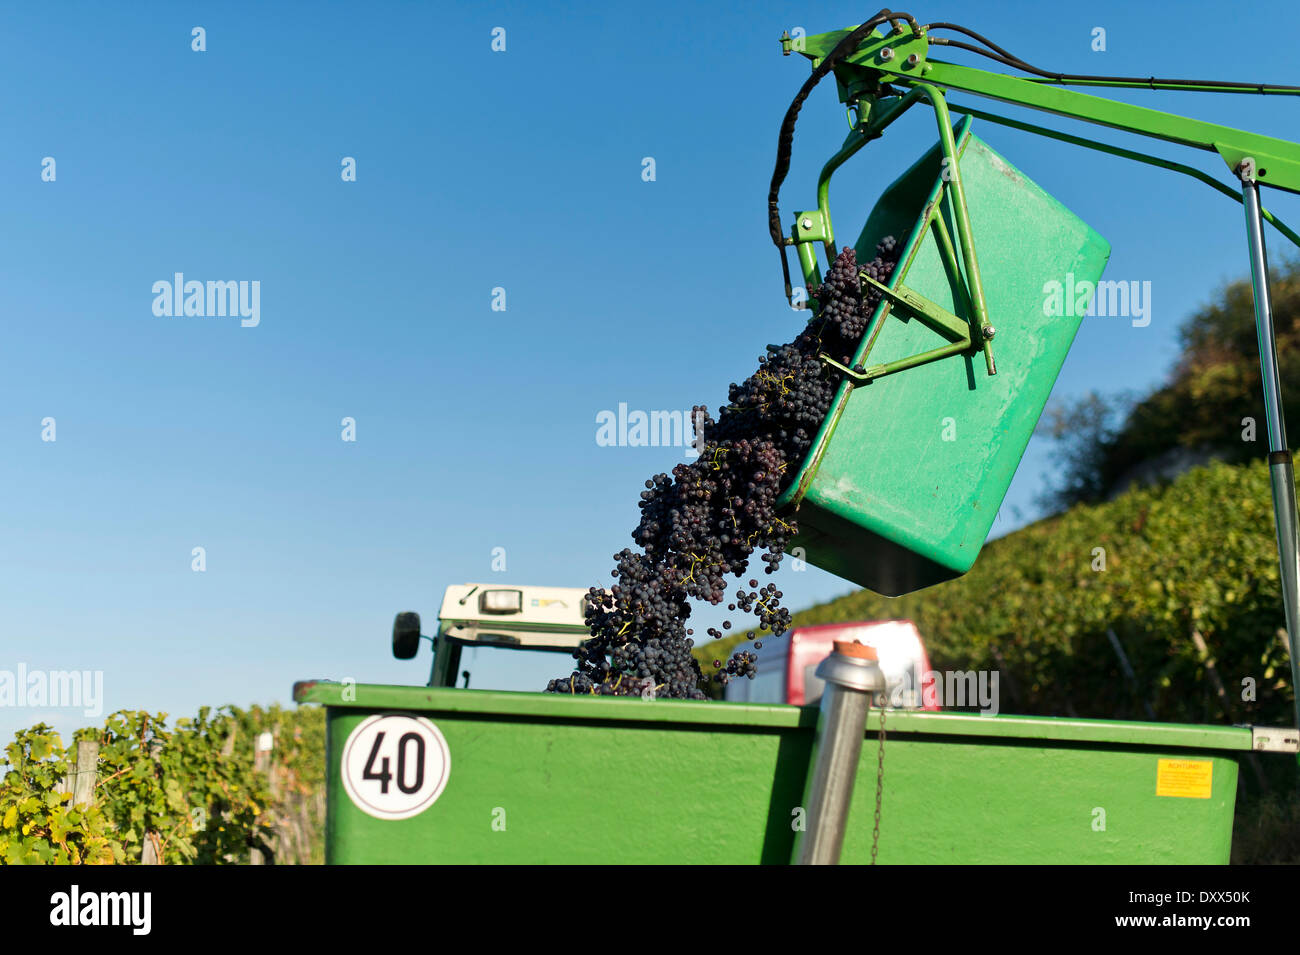 Harvested grapes are collected on tractor trailers, vineyard, Stuttgart, Baden-Württemberg, Germany Stock Photo